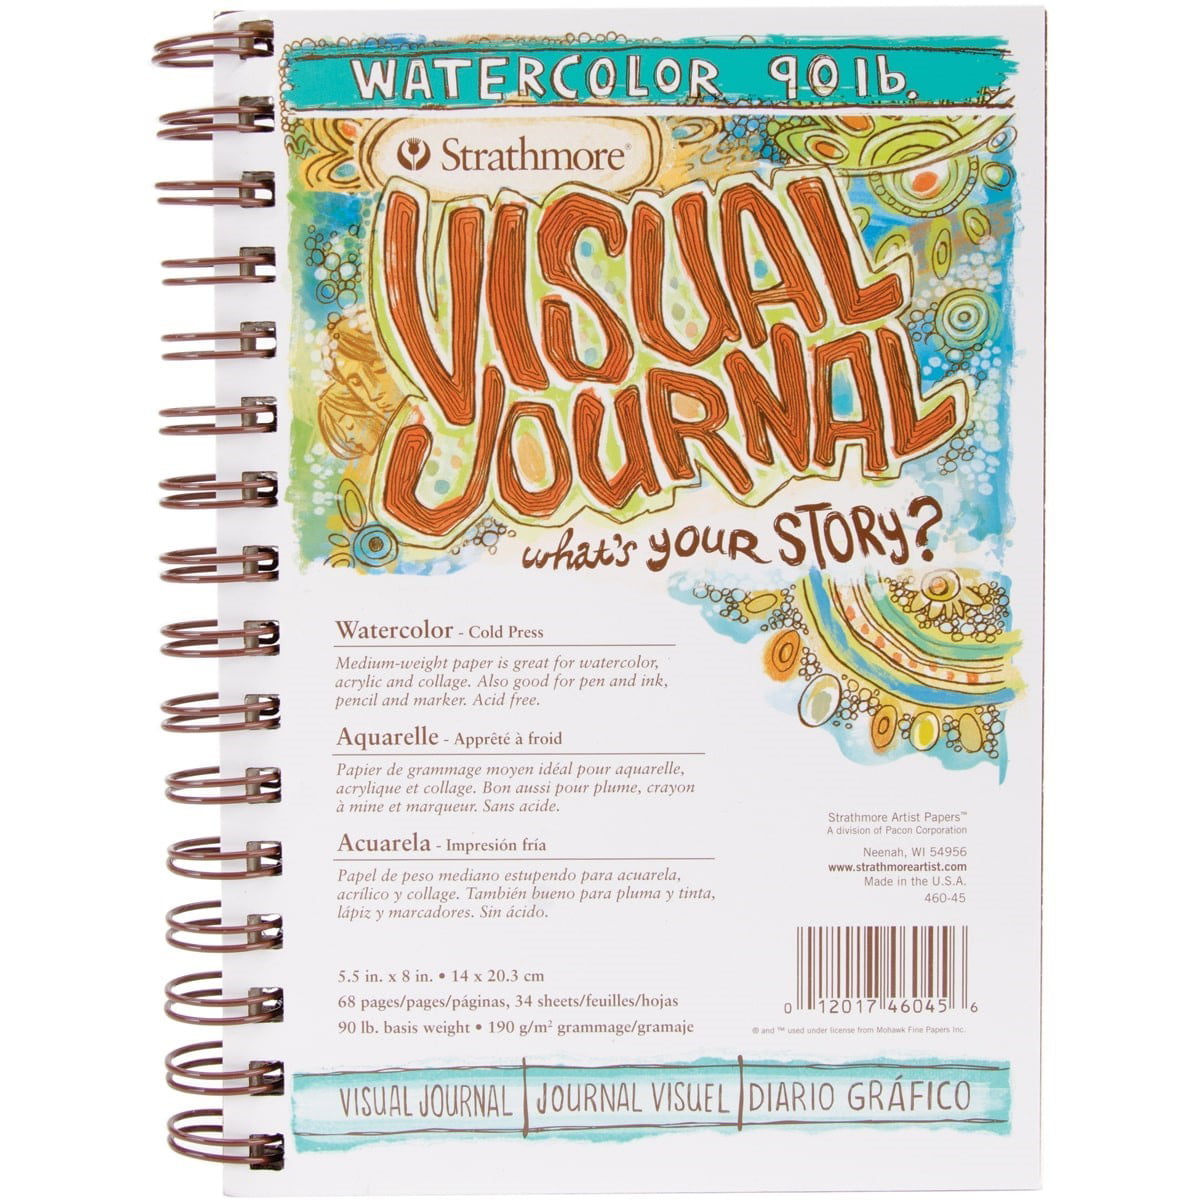 Art Supplies Reviews and Manga Cartoon Sketching: First impression of the  Strathmore 140 lb Watercolor Visual Journal